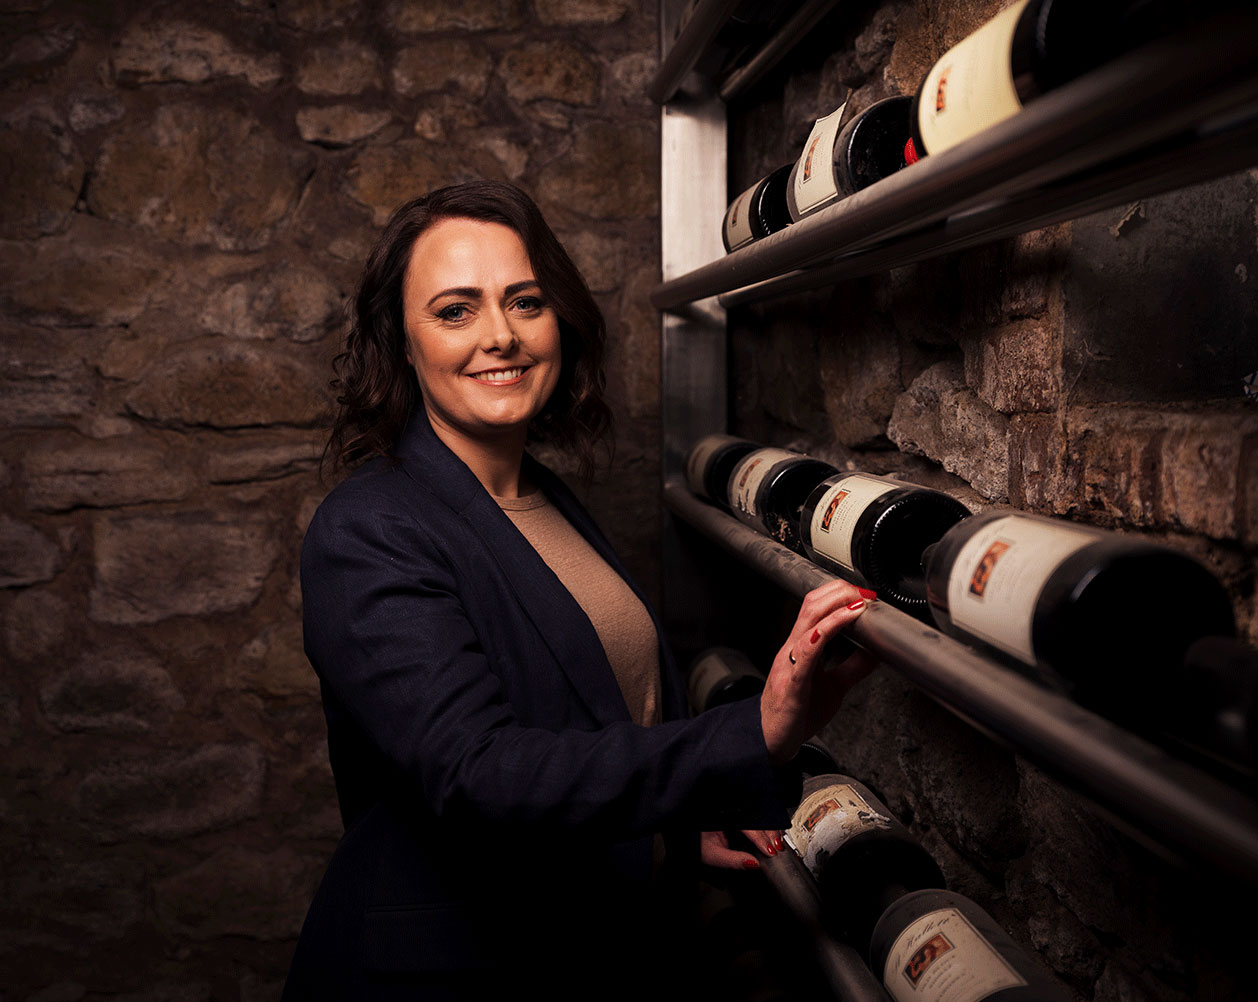 A smiling woman stands in a wine cellar in front of bottles